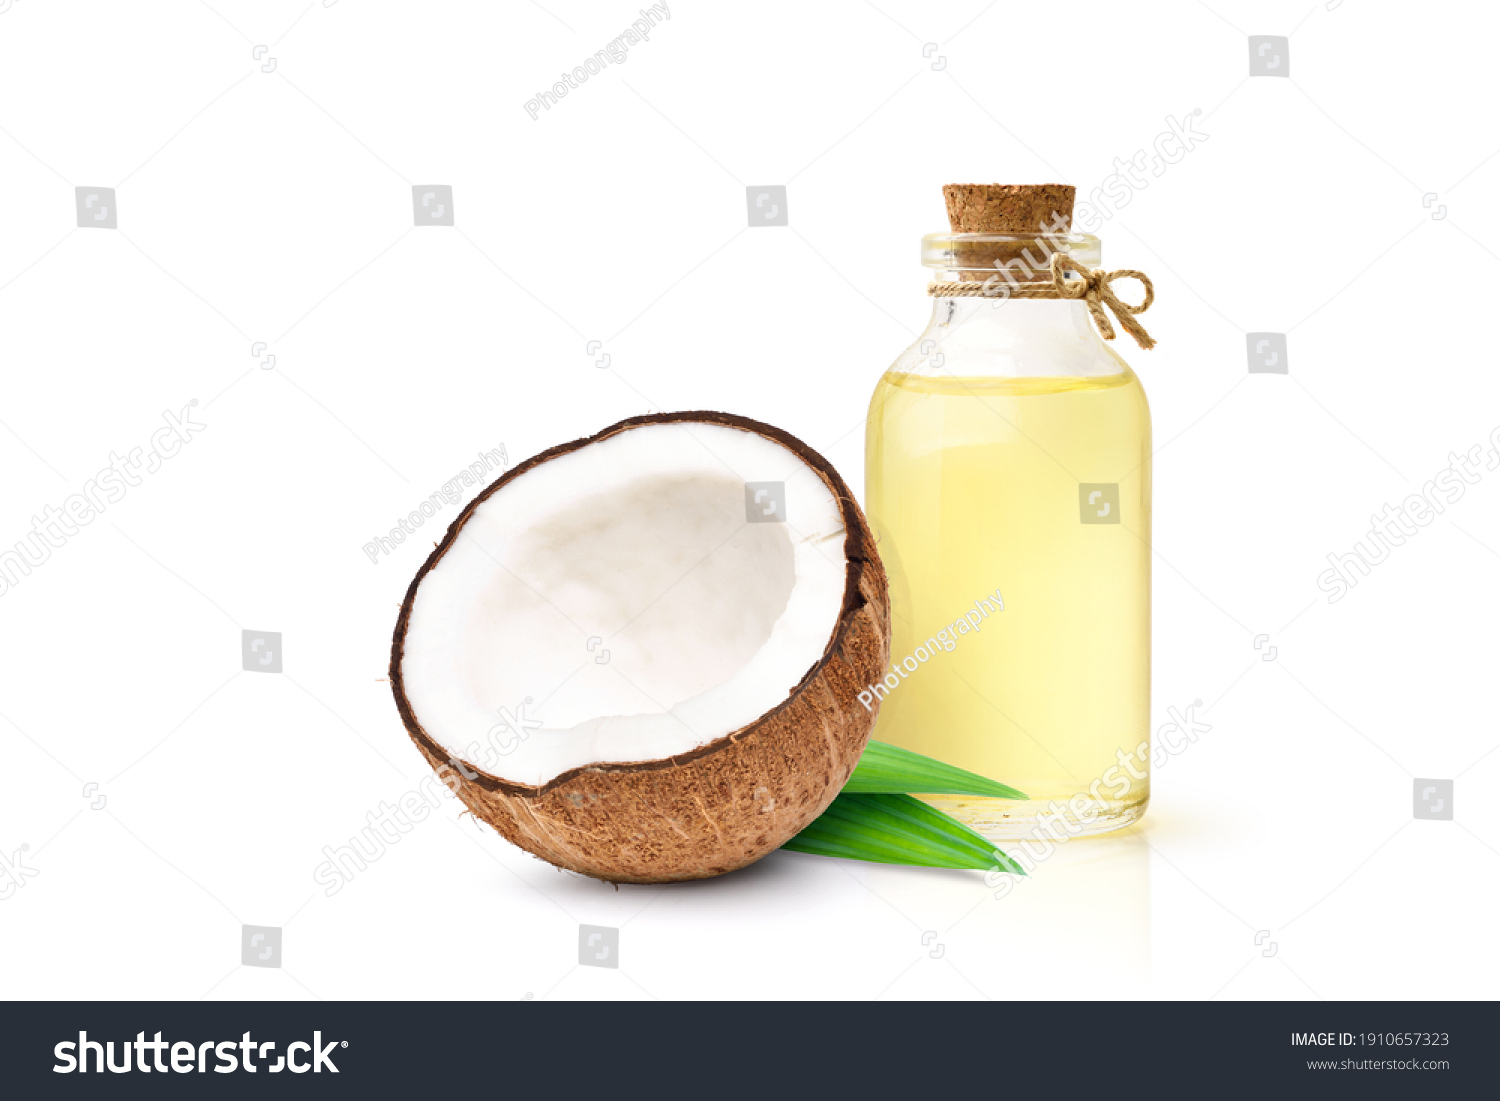 Coconut oil with coconut fruits cut in half isolated on white background. #1910657323